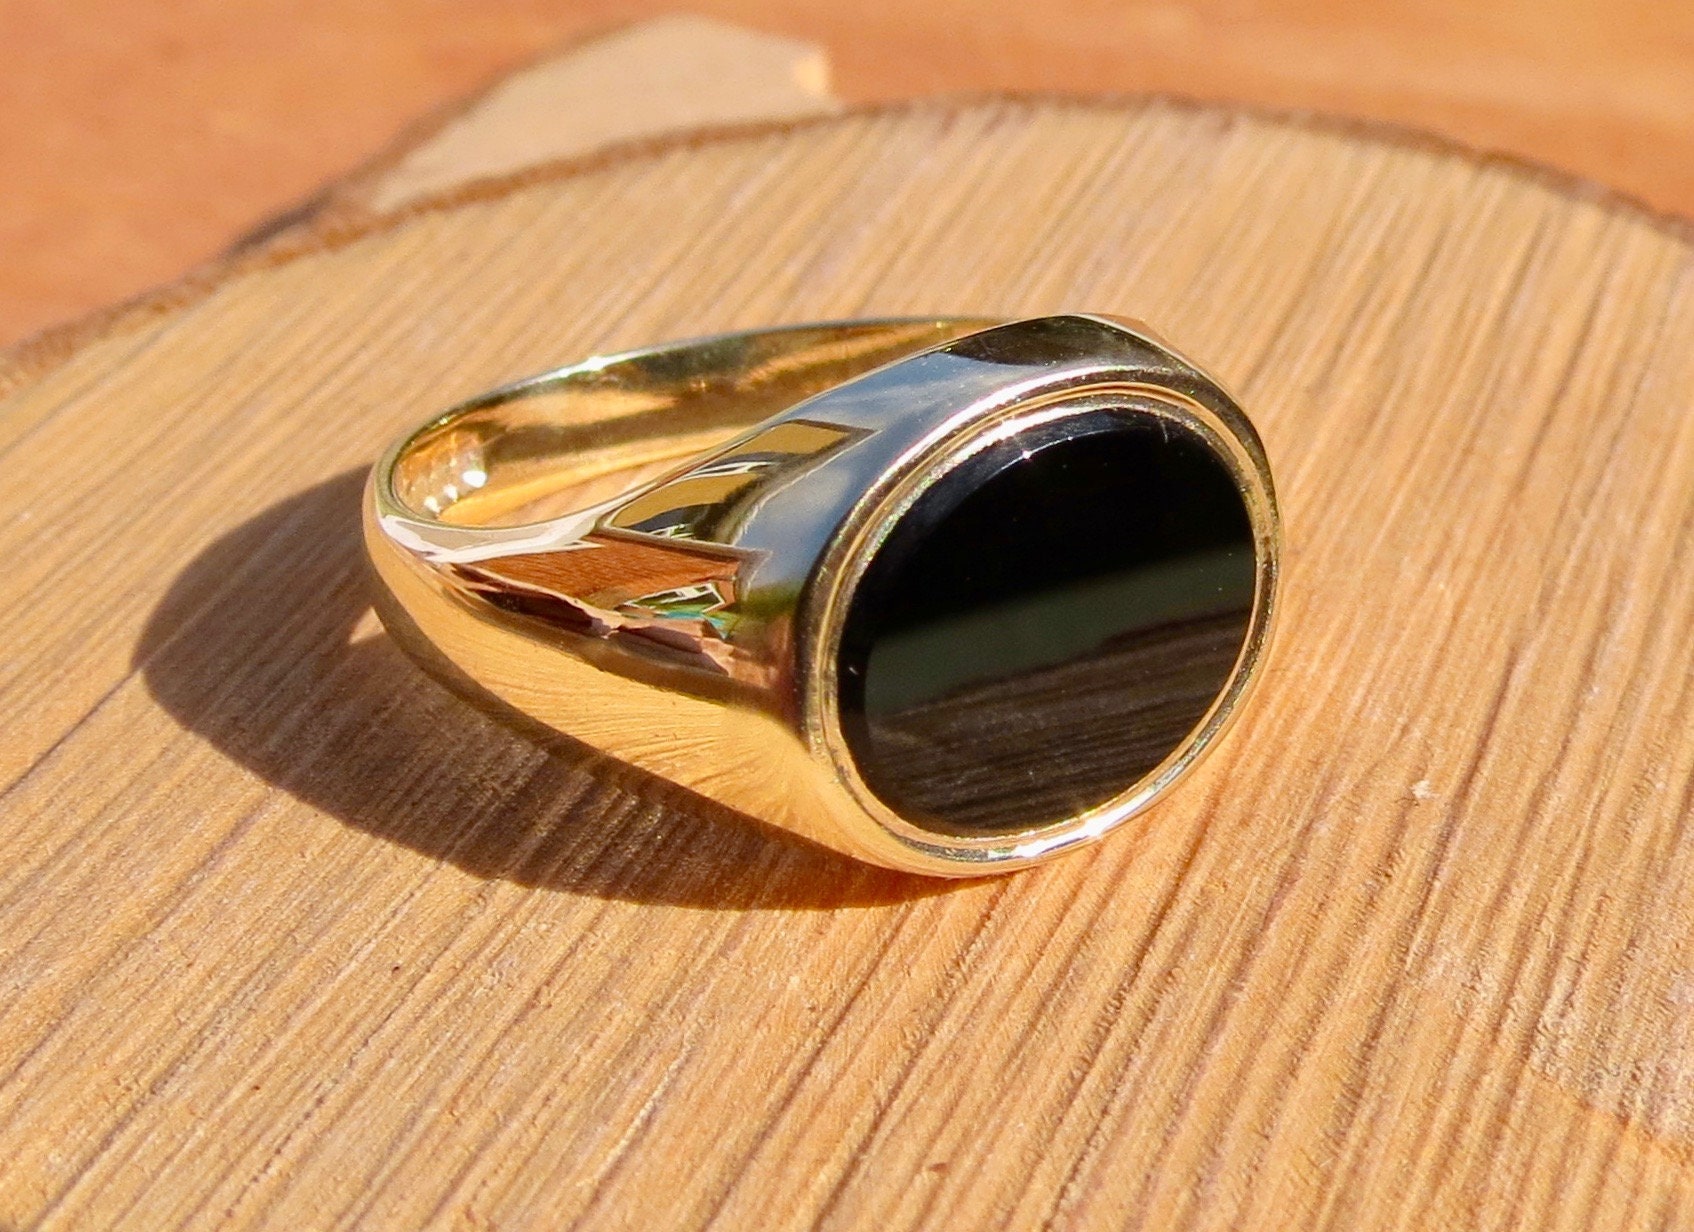 A vintage 9K yellow gold oval black onyx signet ring from 1977 | Etsy